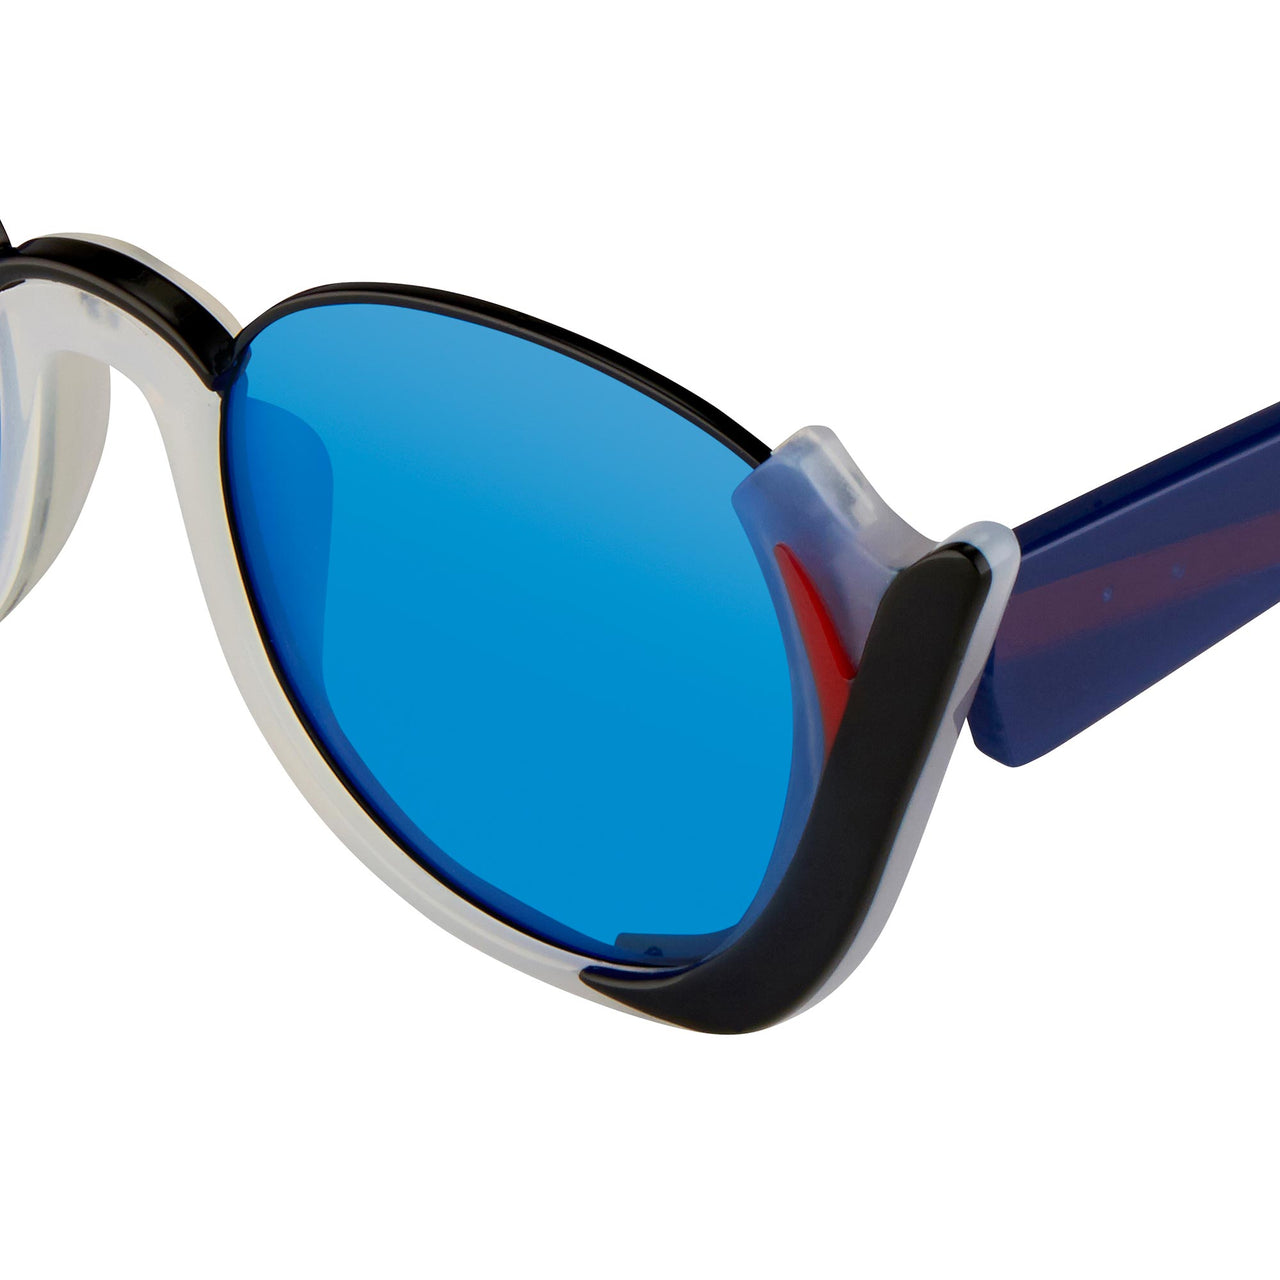 Prabal Gurung Sunglasses Round Black Smokey White With Blue Category 3 Graduated Mirror Lenses PG24C5SUN - Watches & Crystals